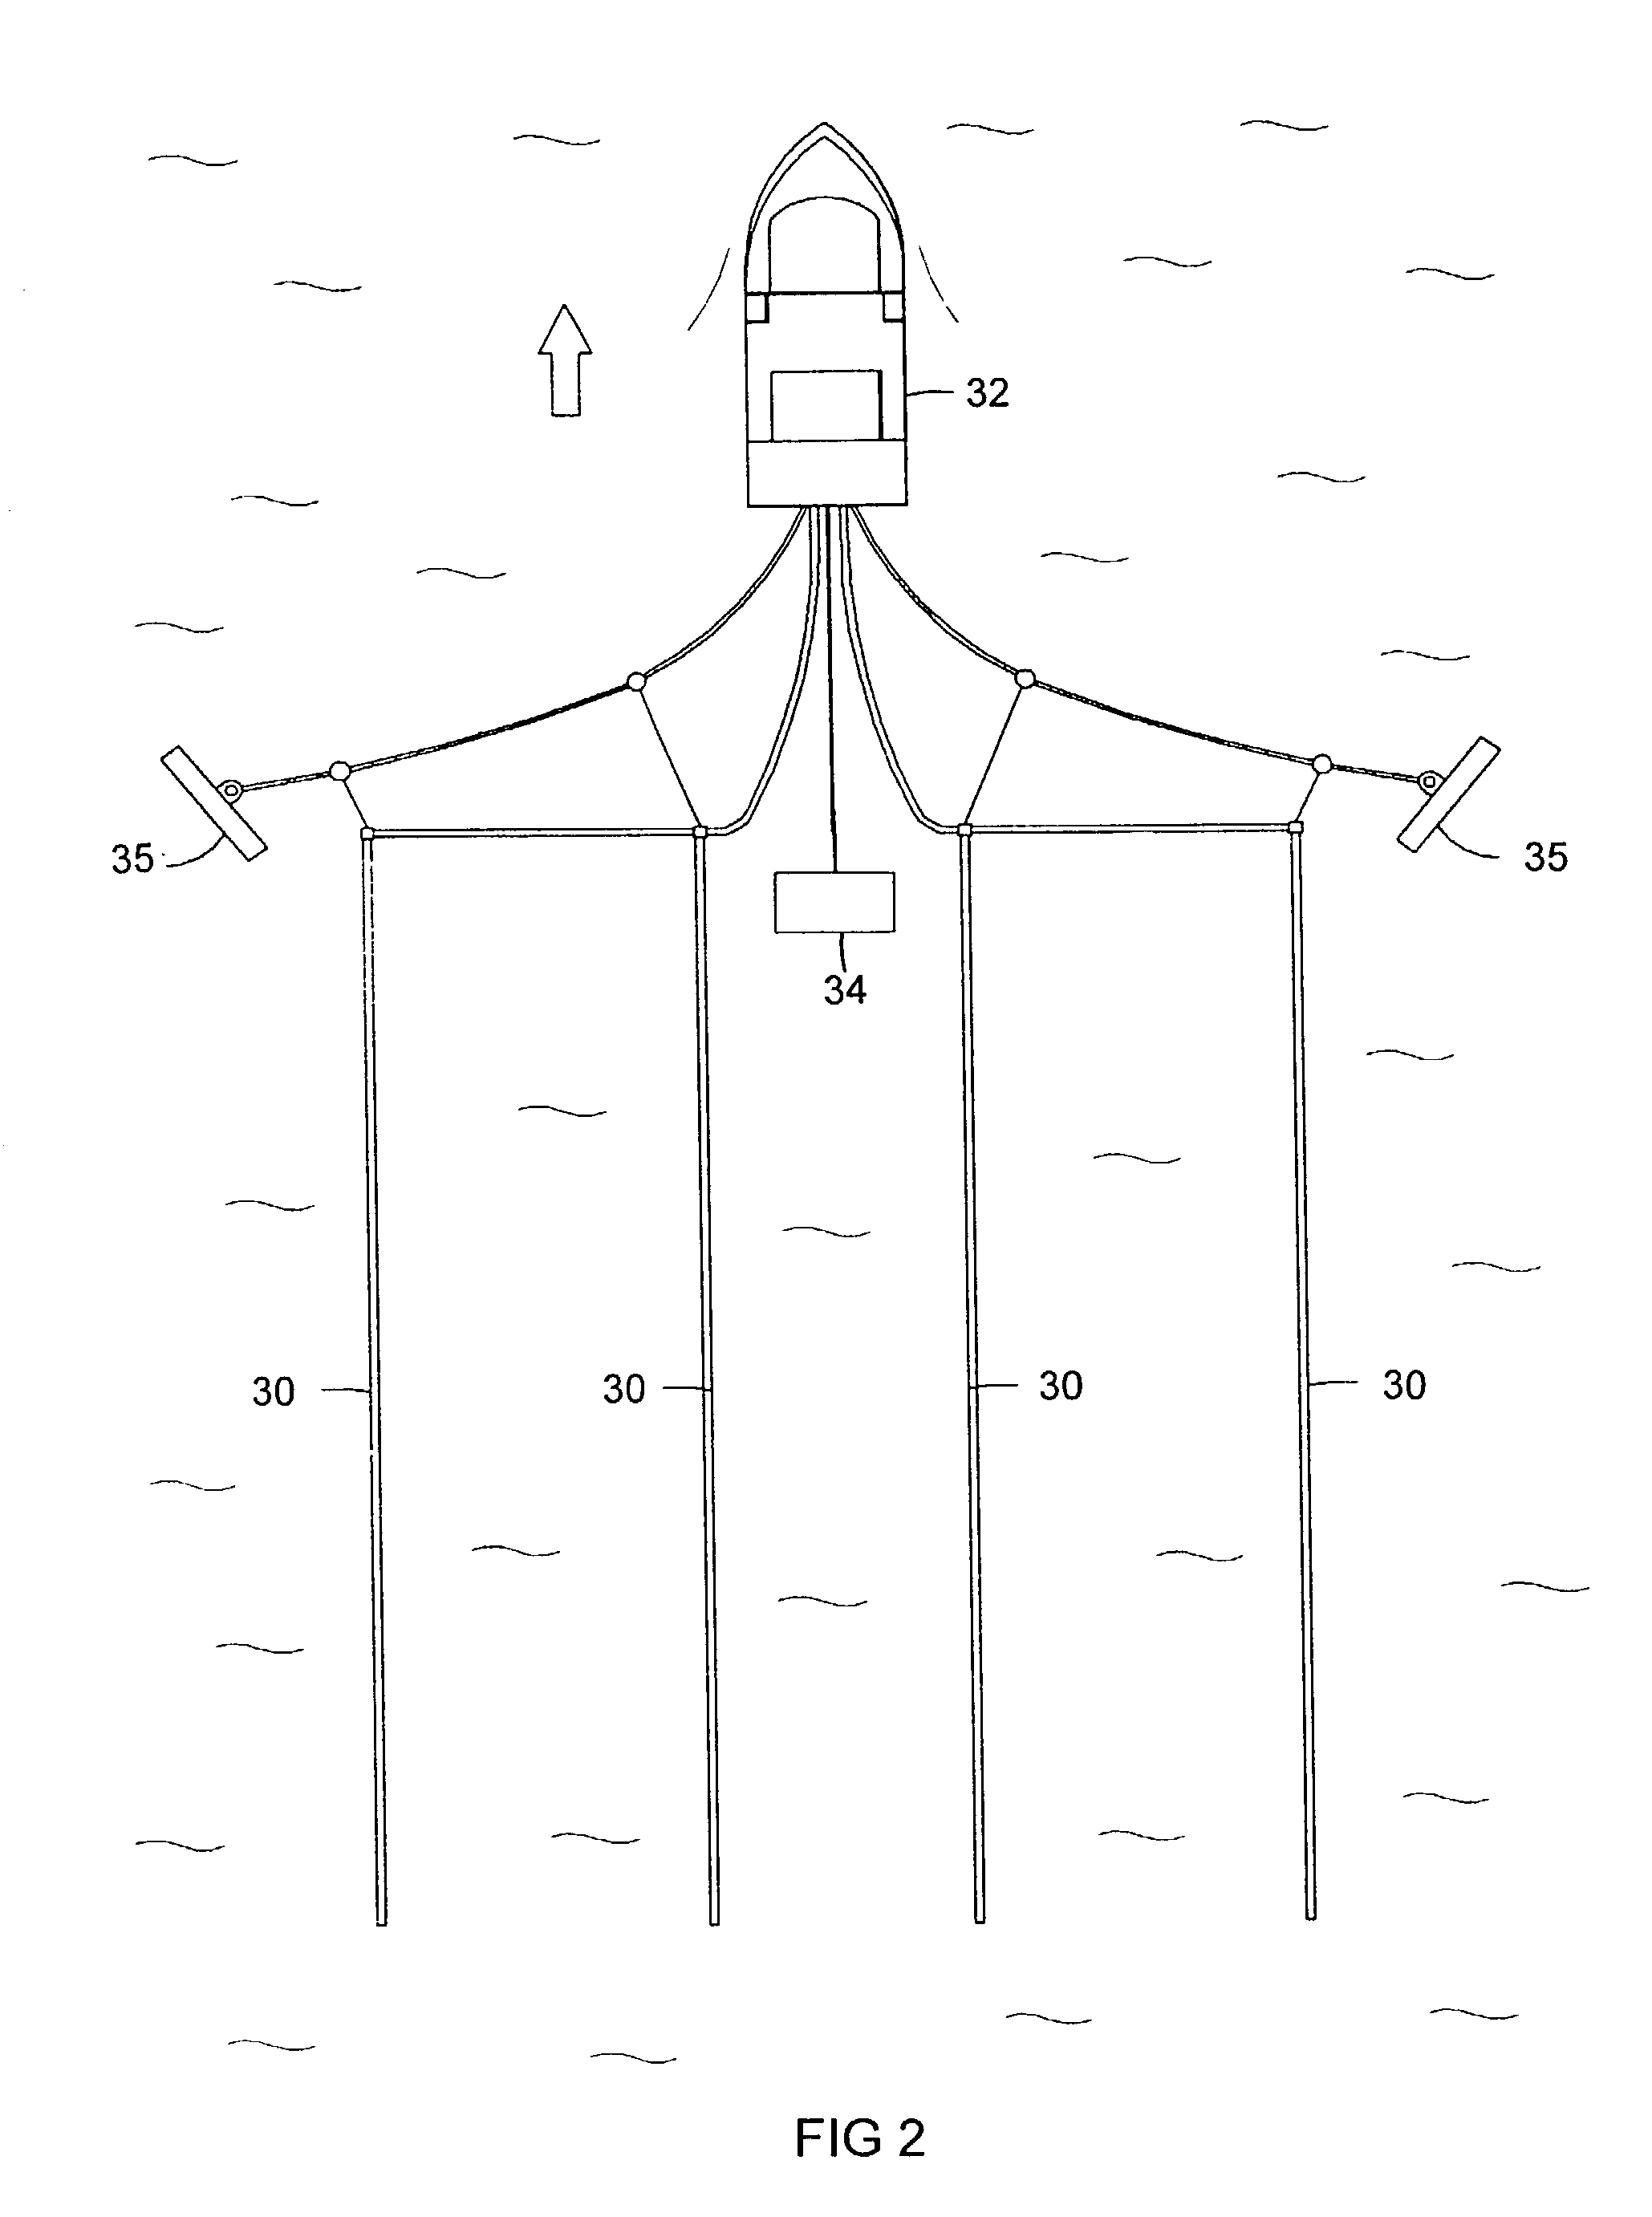 Apparatus and methods for multicomponent marine geophysical data gathering